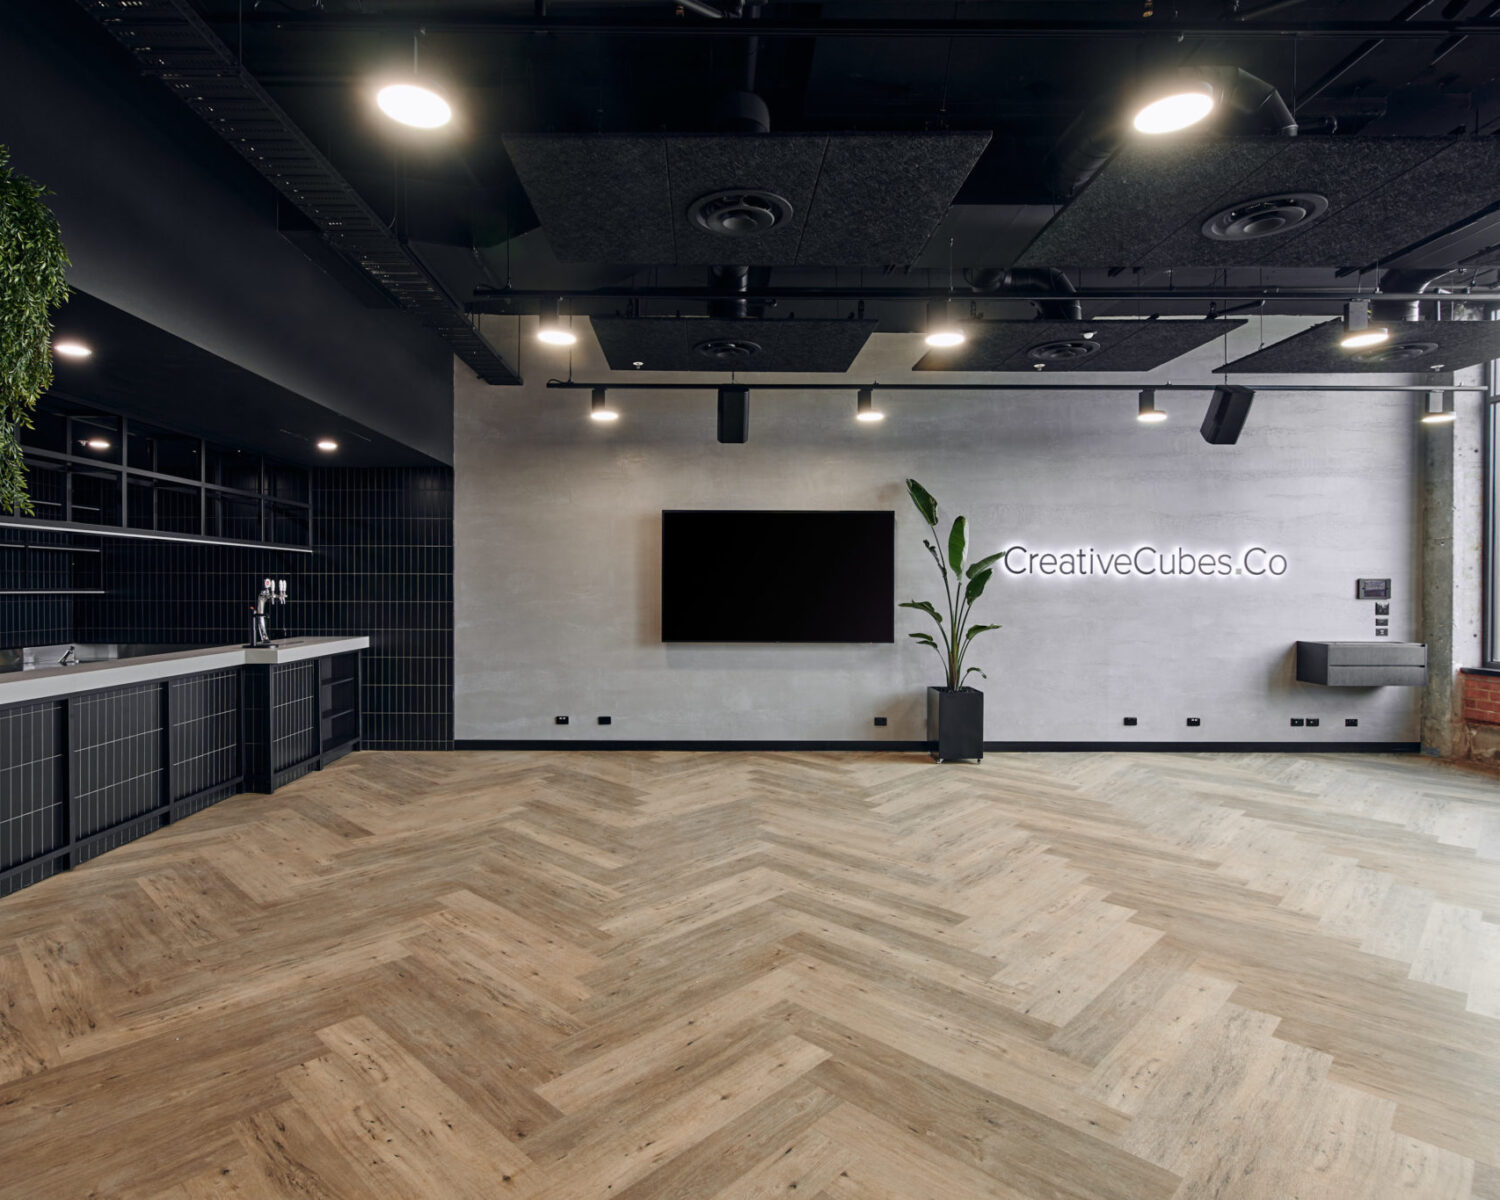 CreativeCubes.Co Carlton VIC 3053 | Private Office For Rent | Coworking | Meeting Rooms For Hire | Event Space | Lygon Street | Lygon Court - 00014